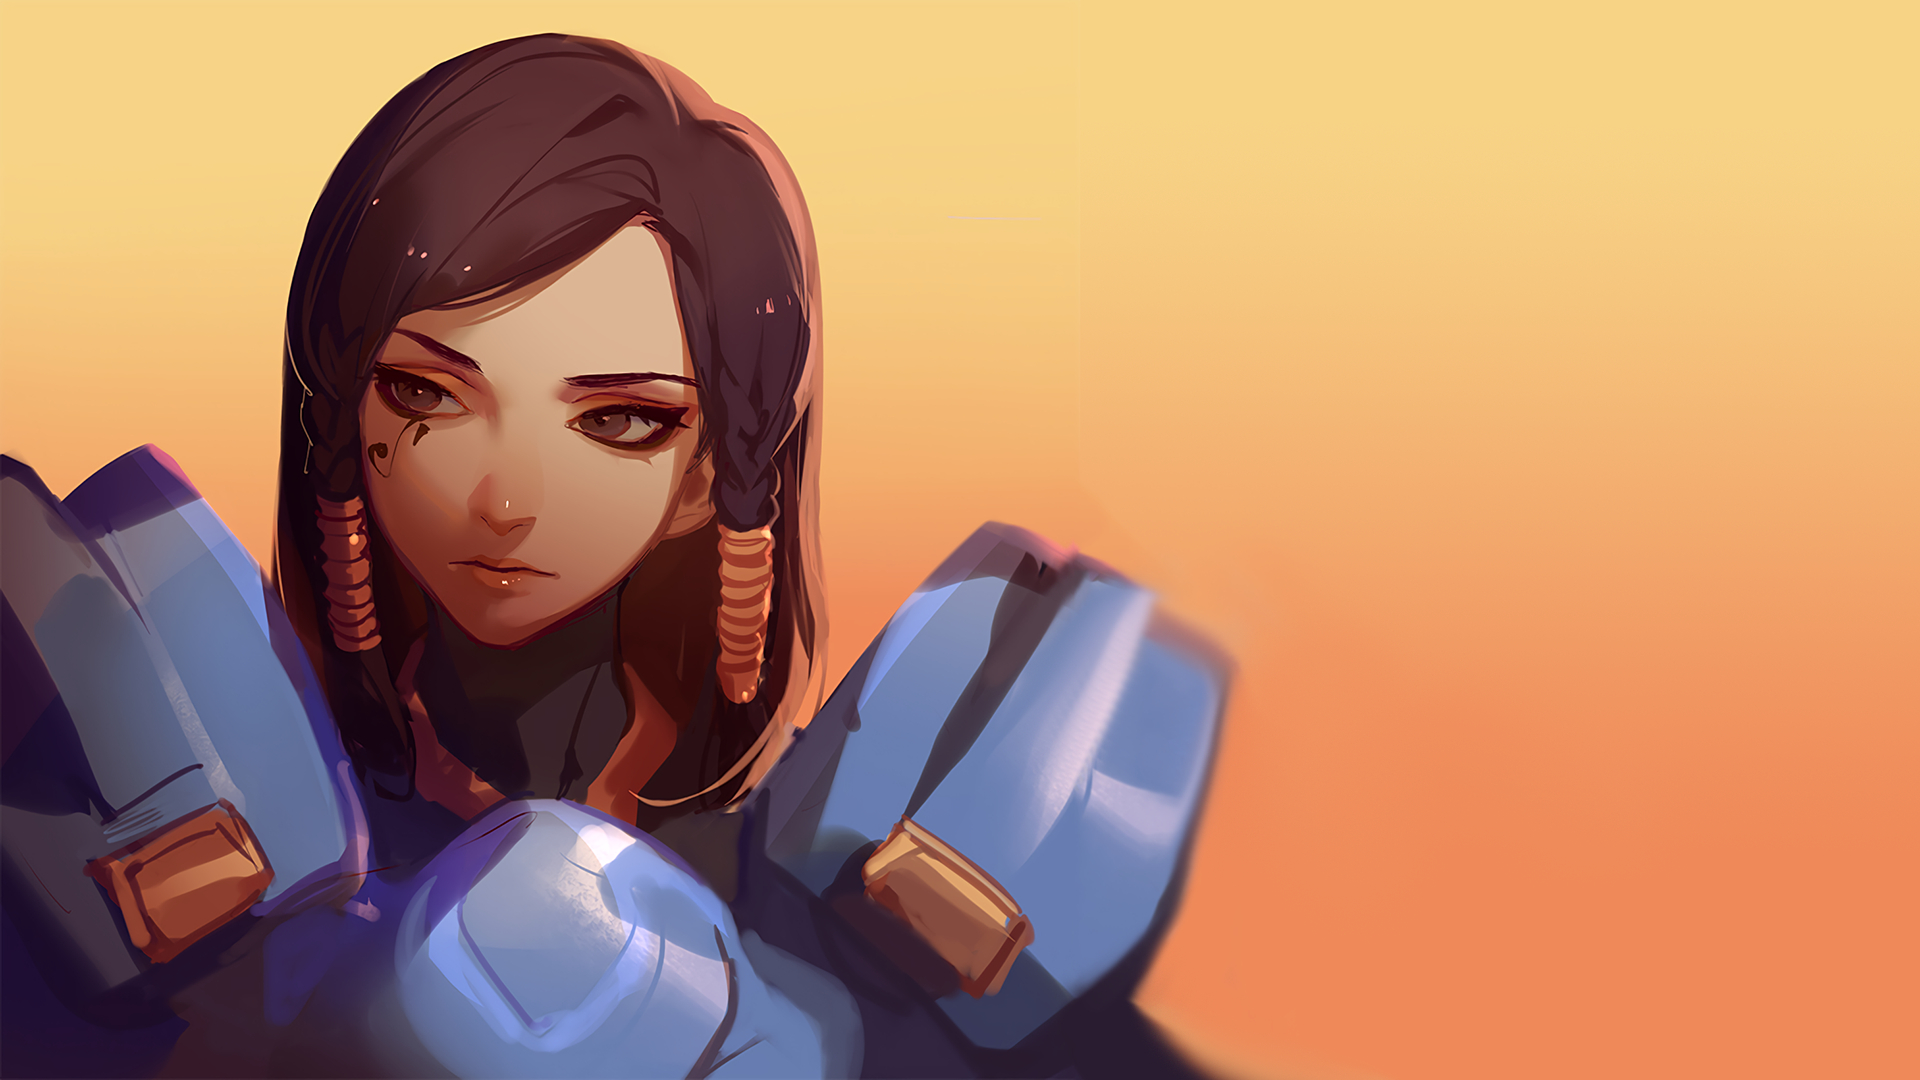 1920x1080 Wallpaper : video game characters, Pharah Overwatch dioni 1383567 HD Wallpapers